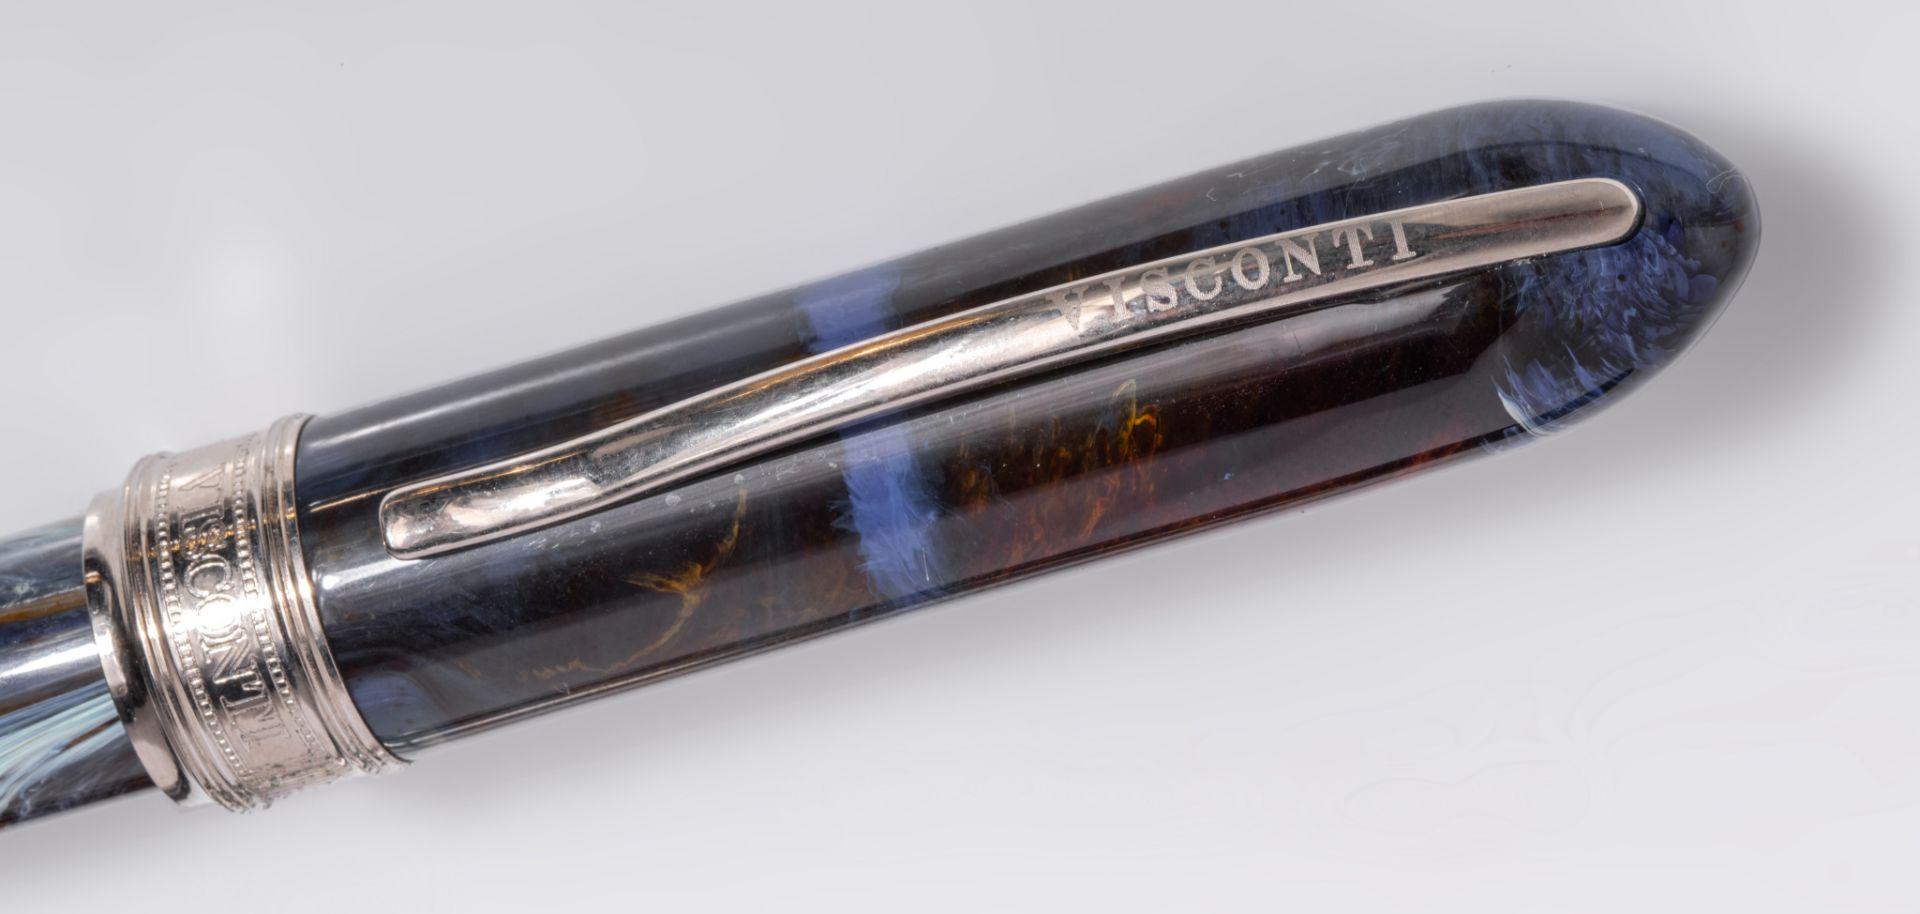 A Jorg Hysek rollerball/ballpoint and other writing equipment - Image 5 of 7